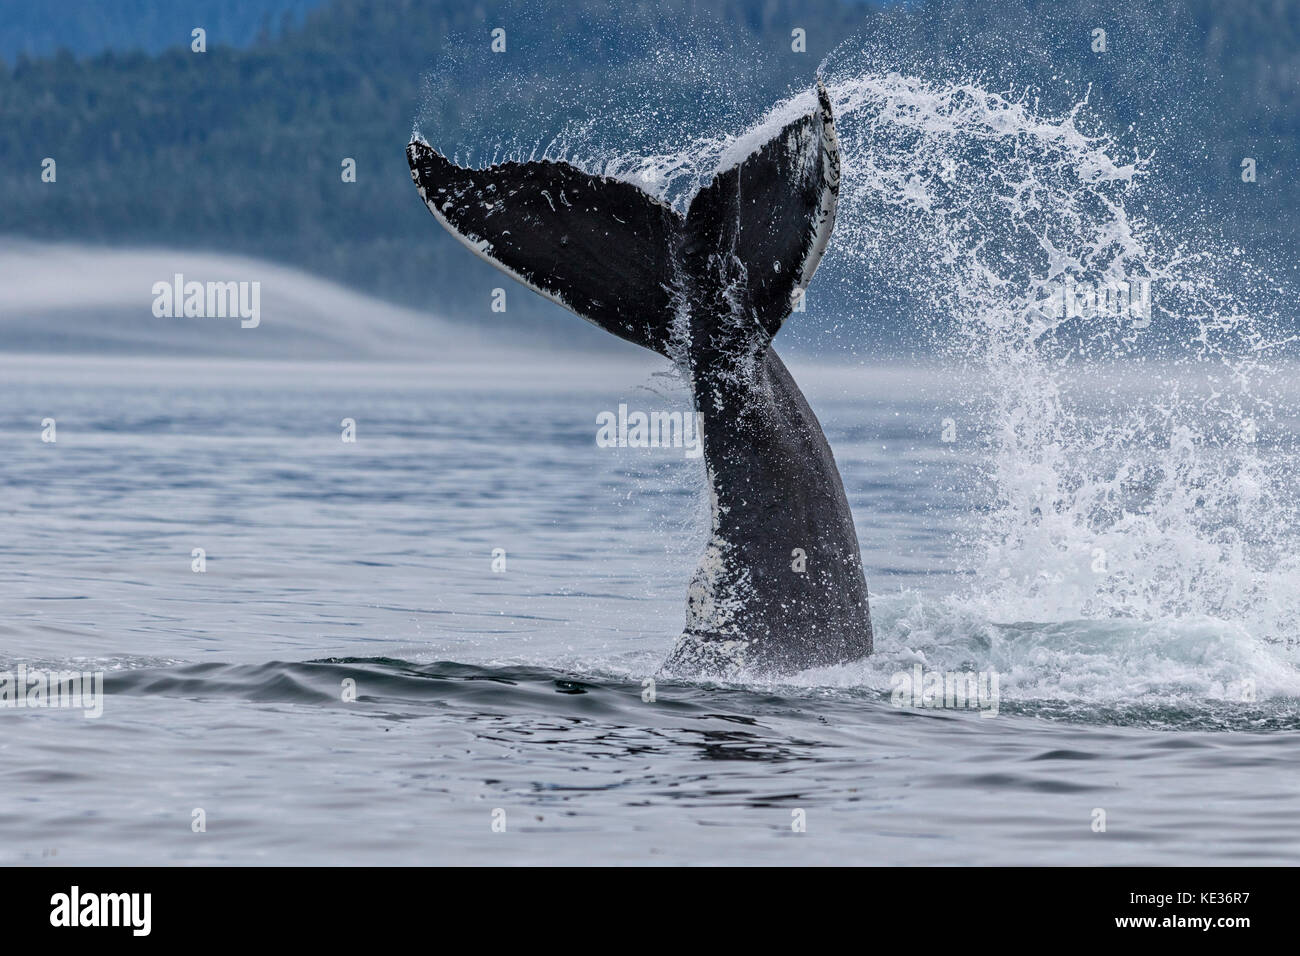 Humpback whale splashing with its tail in Queen Charlotte Strait off northern Vancouver Island, British Columbia, Canada. Stock Photo